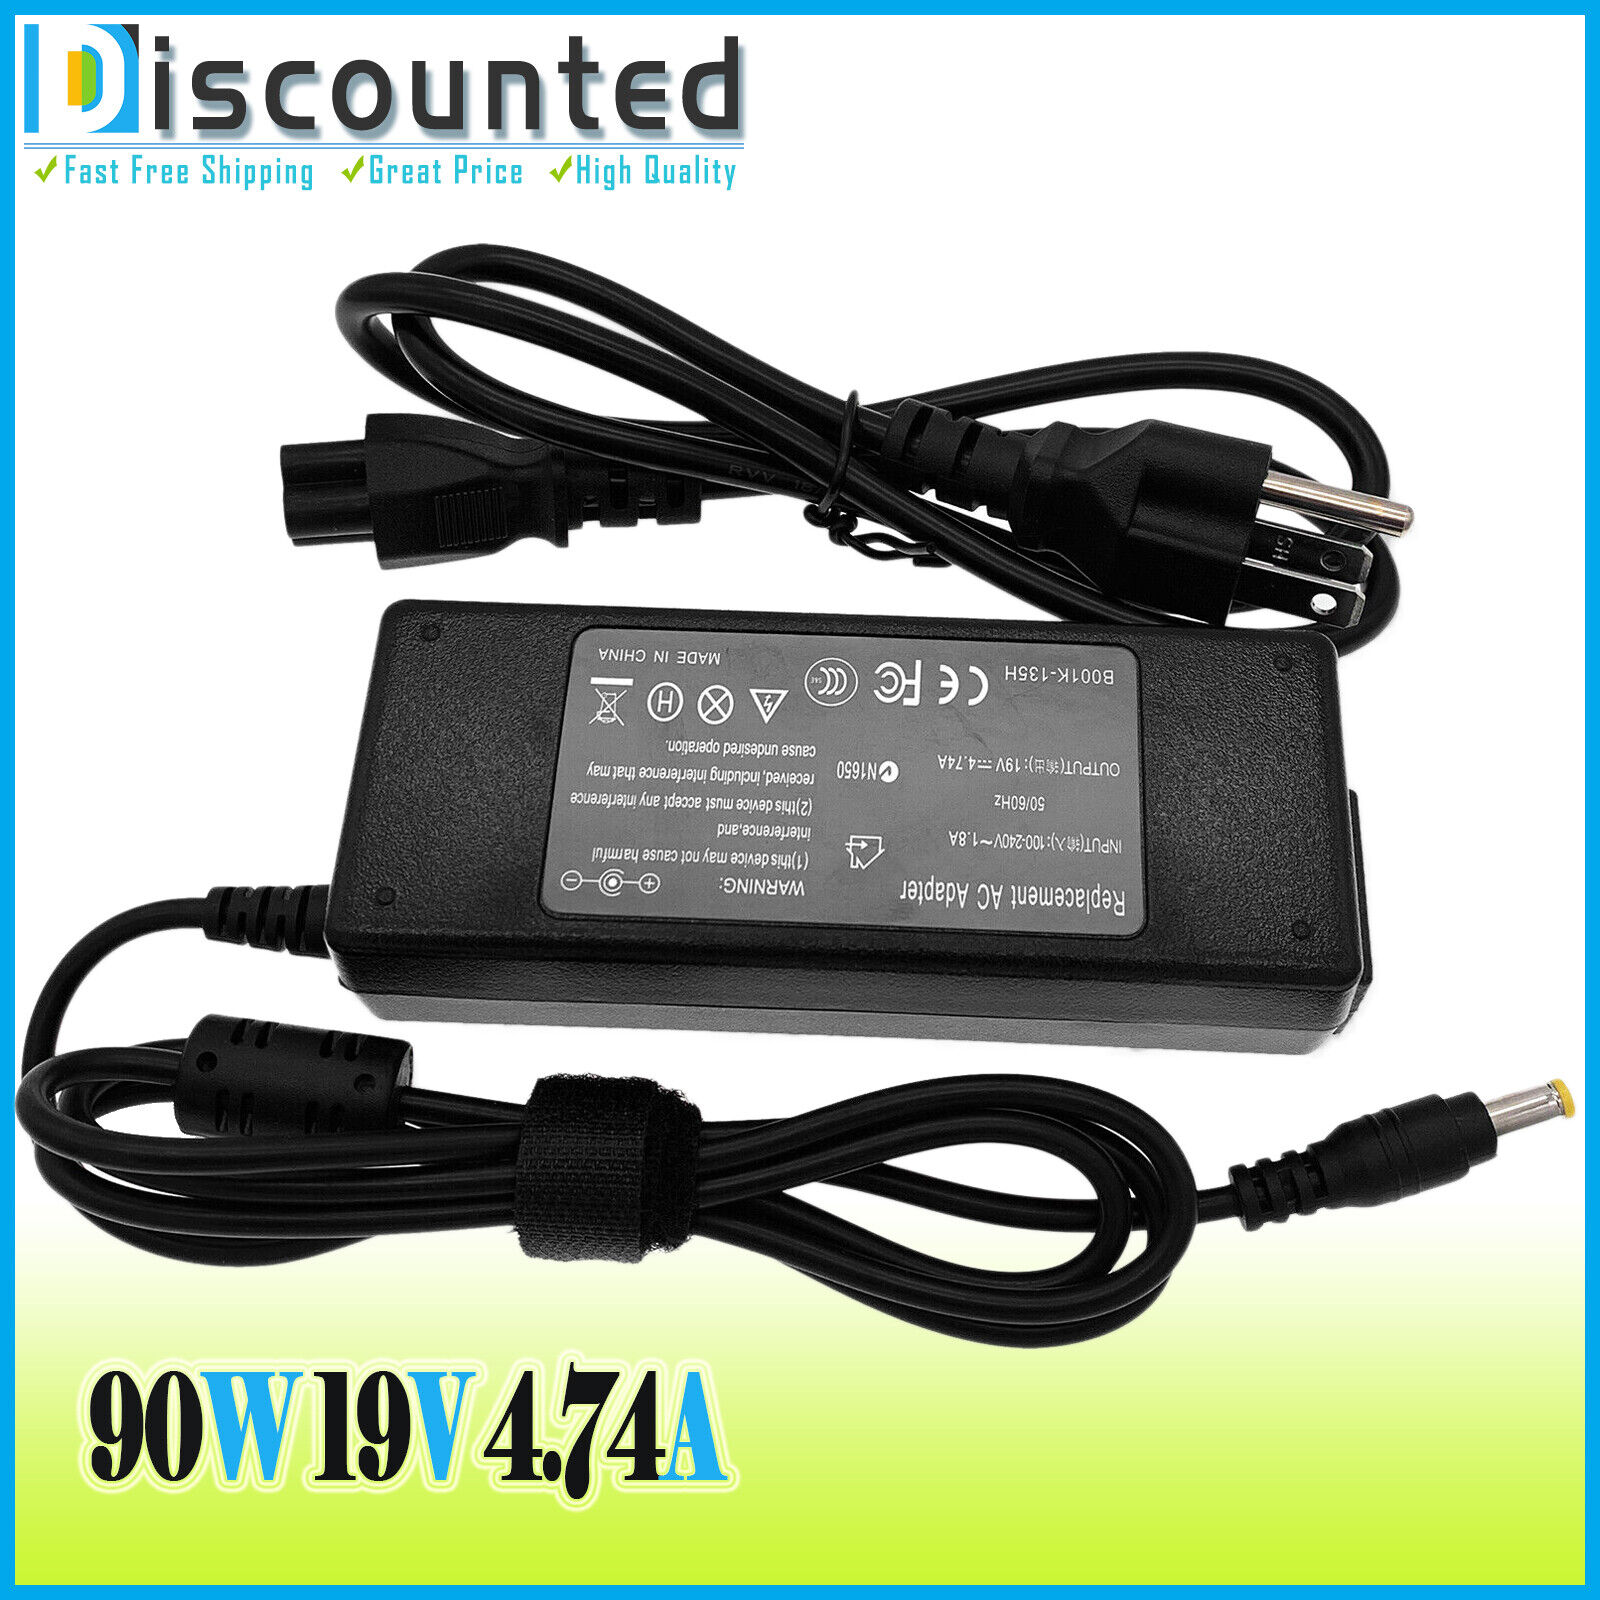 19V 4.74A 90W AC Adapter Charger Power Supply Cord For Acer Aspire 5920G 5750G